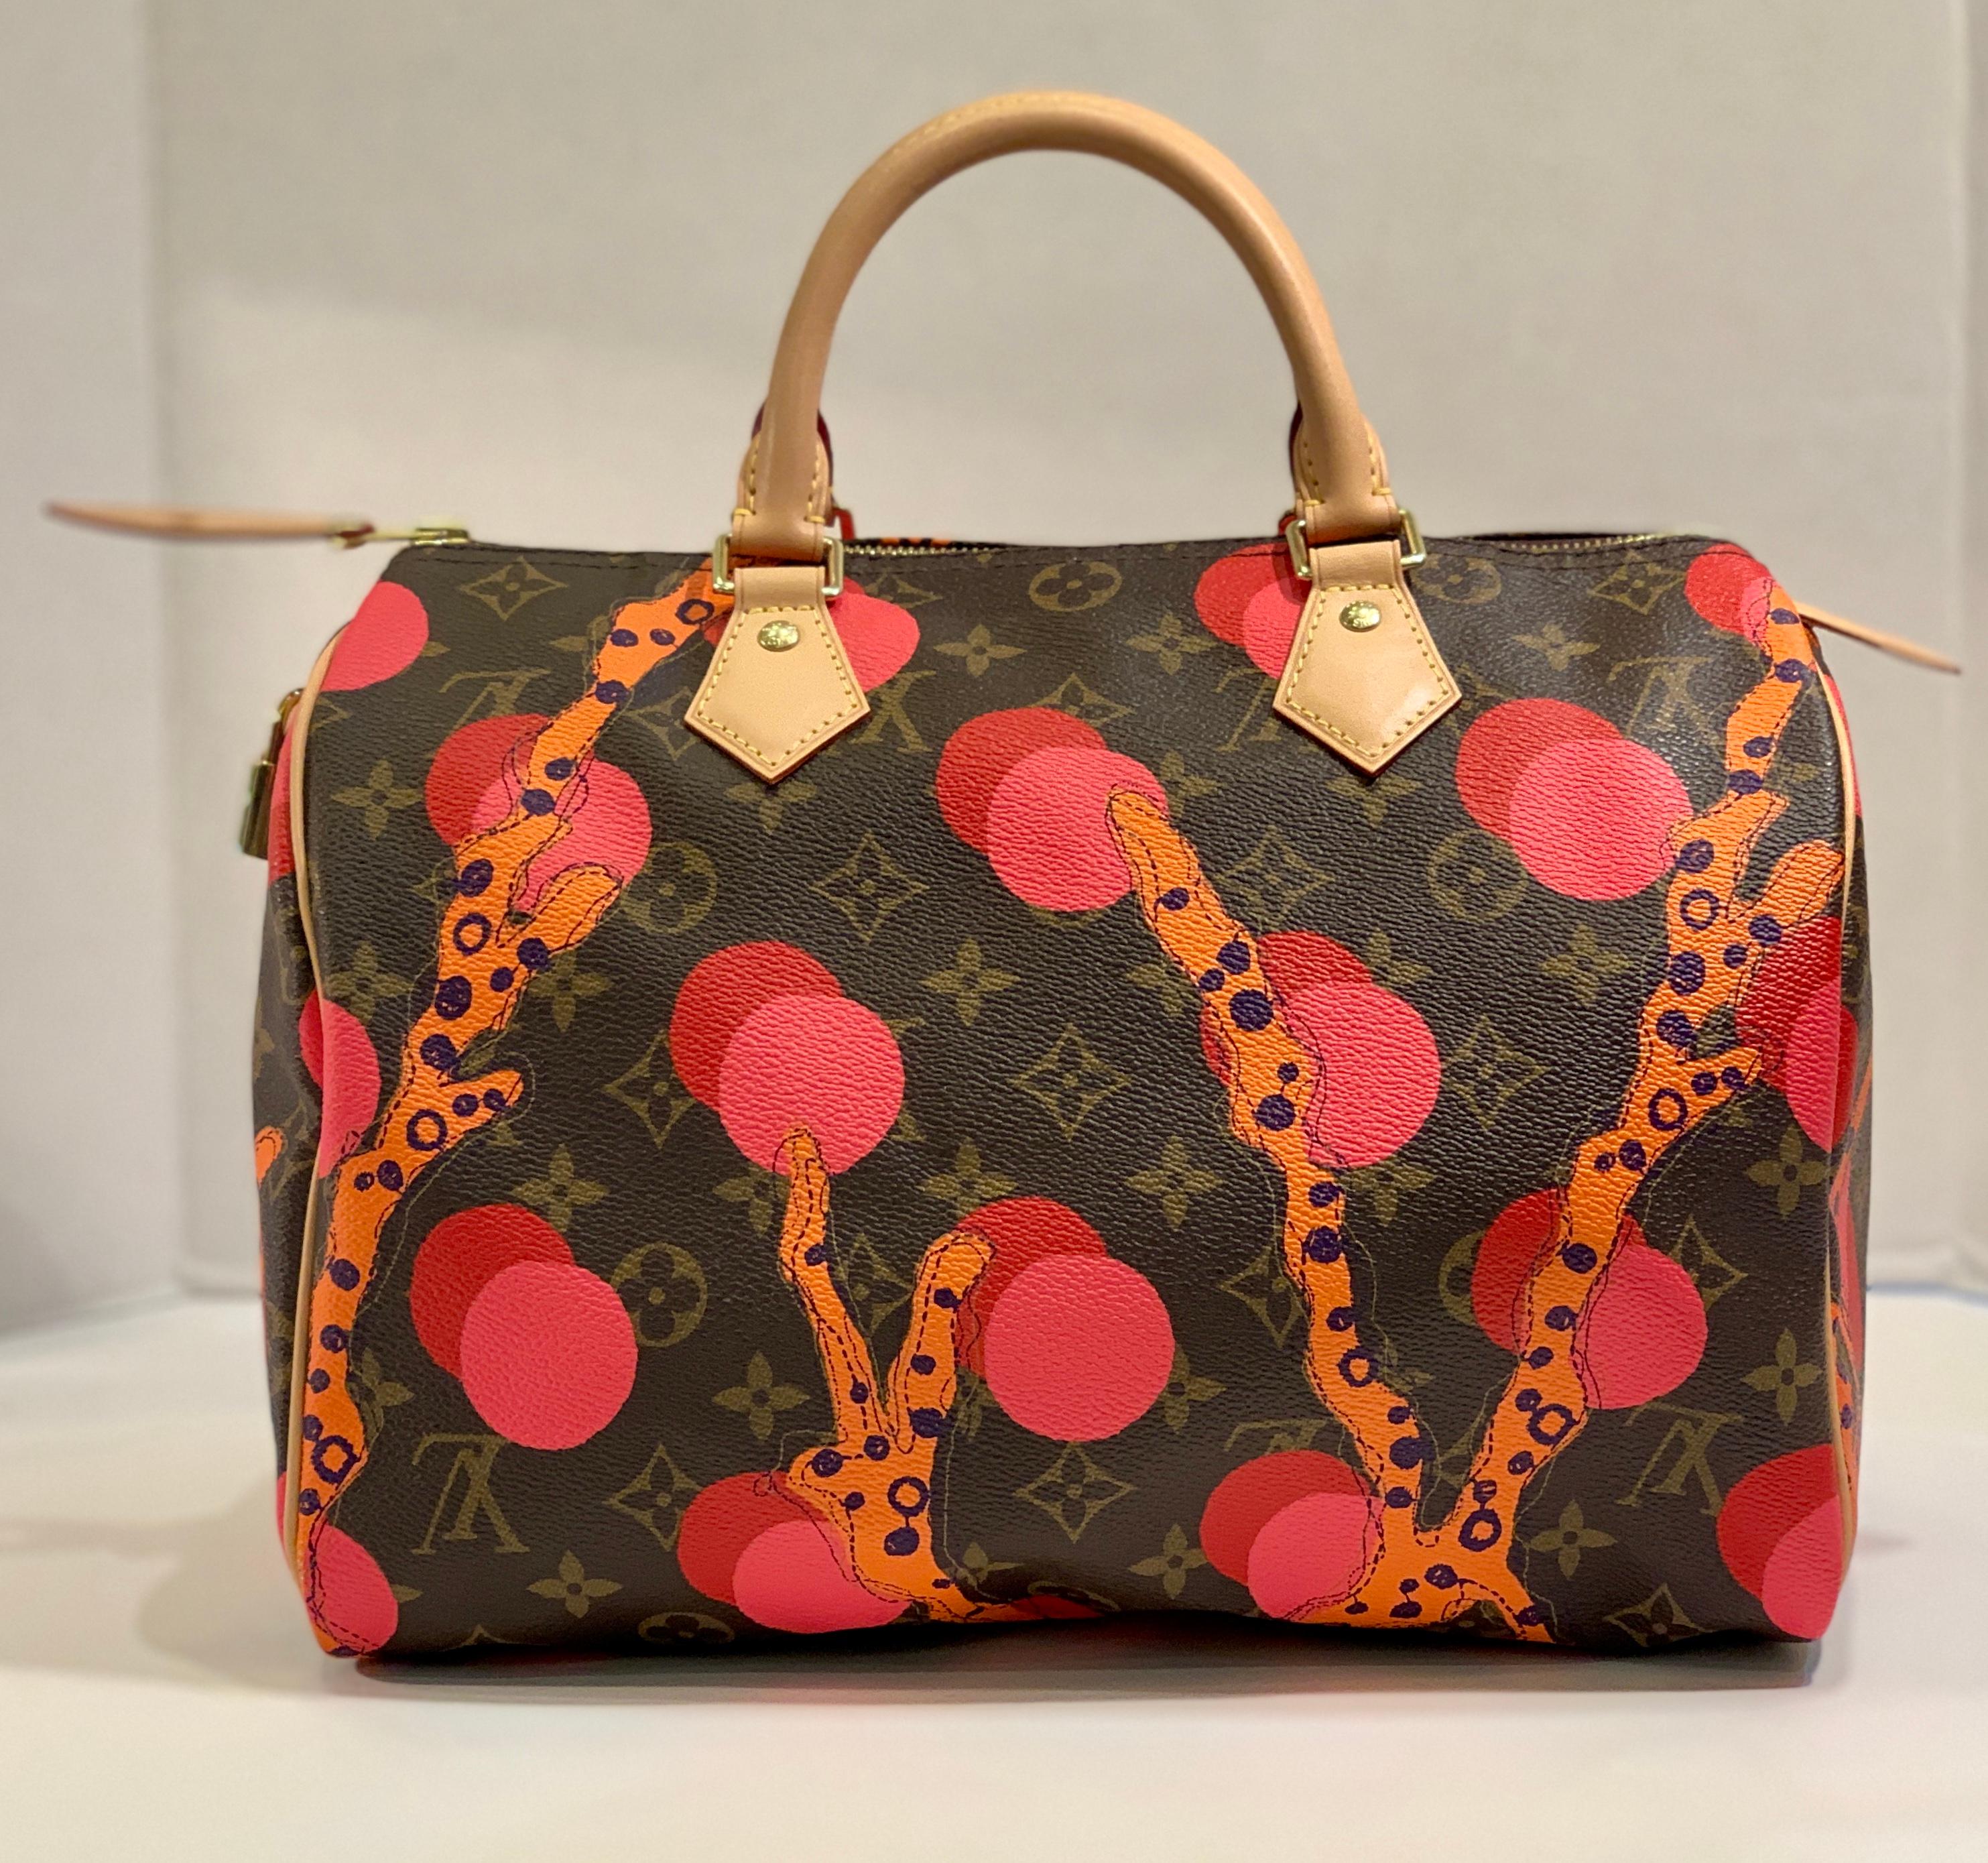 Coveted, limited edition Louis Vuitton Speedy 30 handbag in Grenade Ramages Monogram canvas with beautiful, coral reef inspired colors and a playful pattern from the LV Summer 2015 collection.  Bag features gold tone metal hardware with a zipper